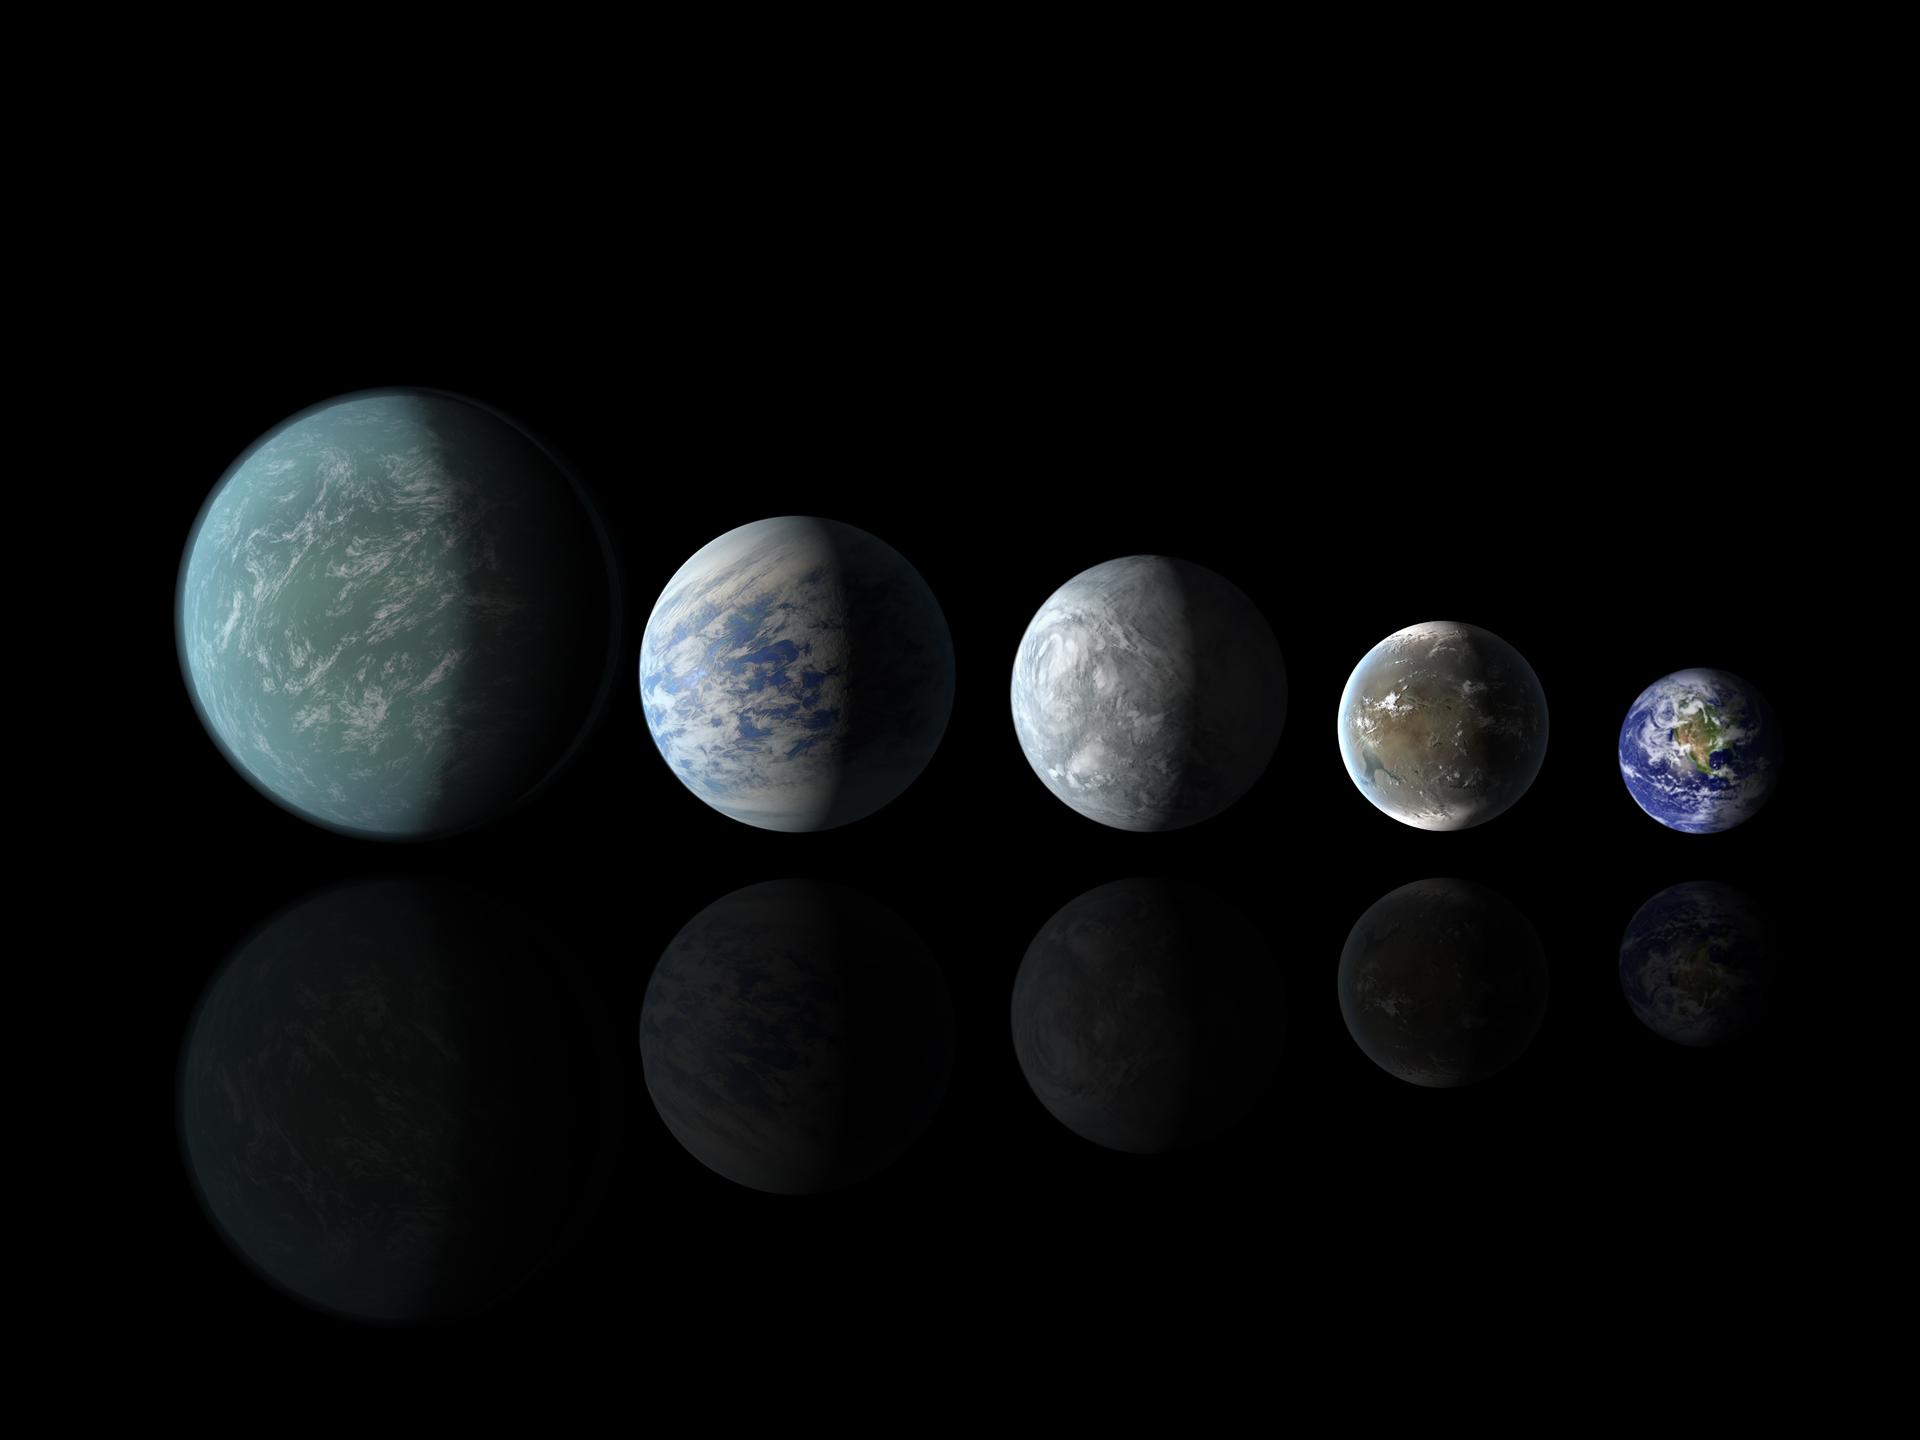 Scientists using NASA's Kepler space telescope have found the best candidates yet for habitable worlds beyond the solar system.